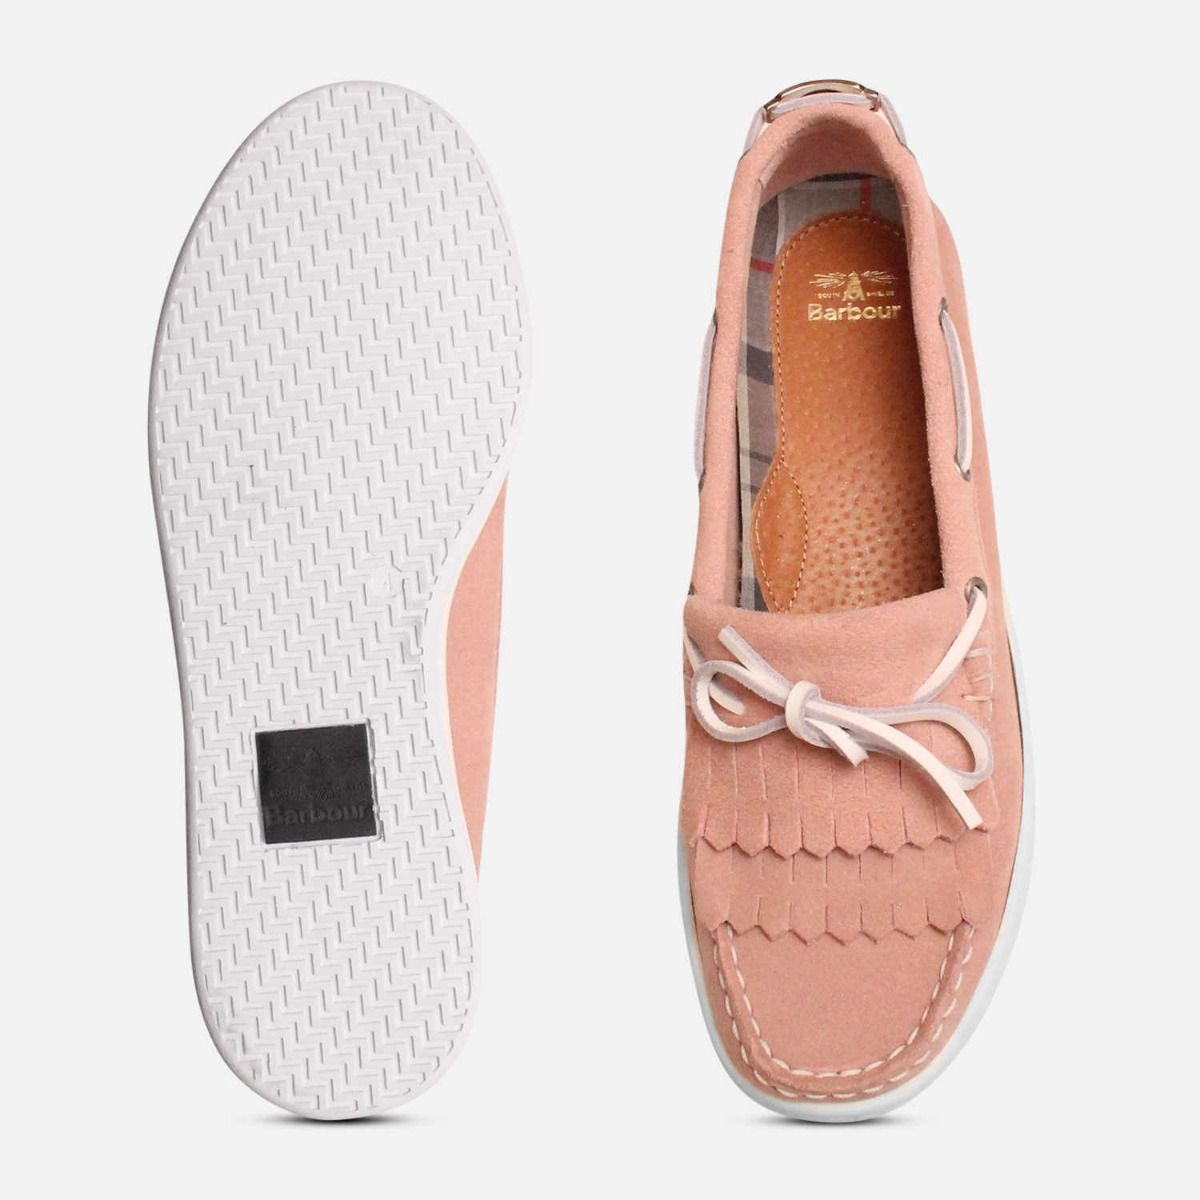 Barbour Pink Suede Deck Shoes with Klara White Sole